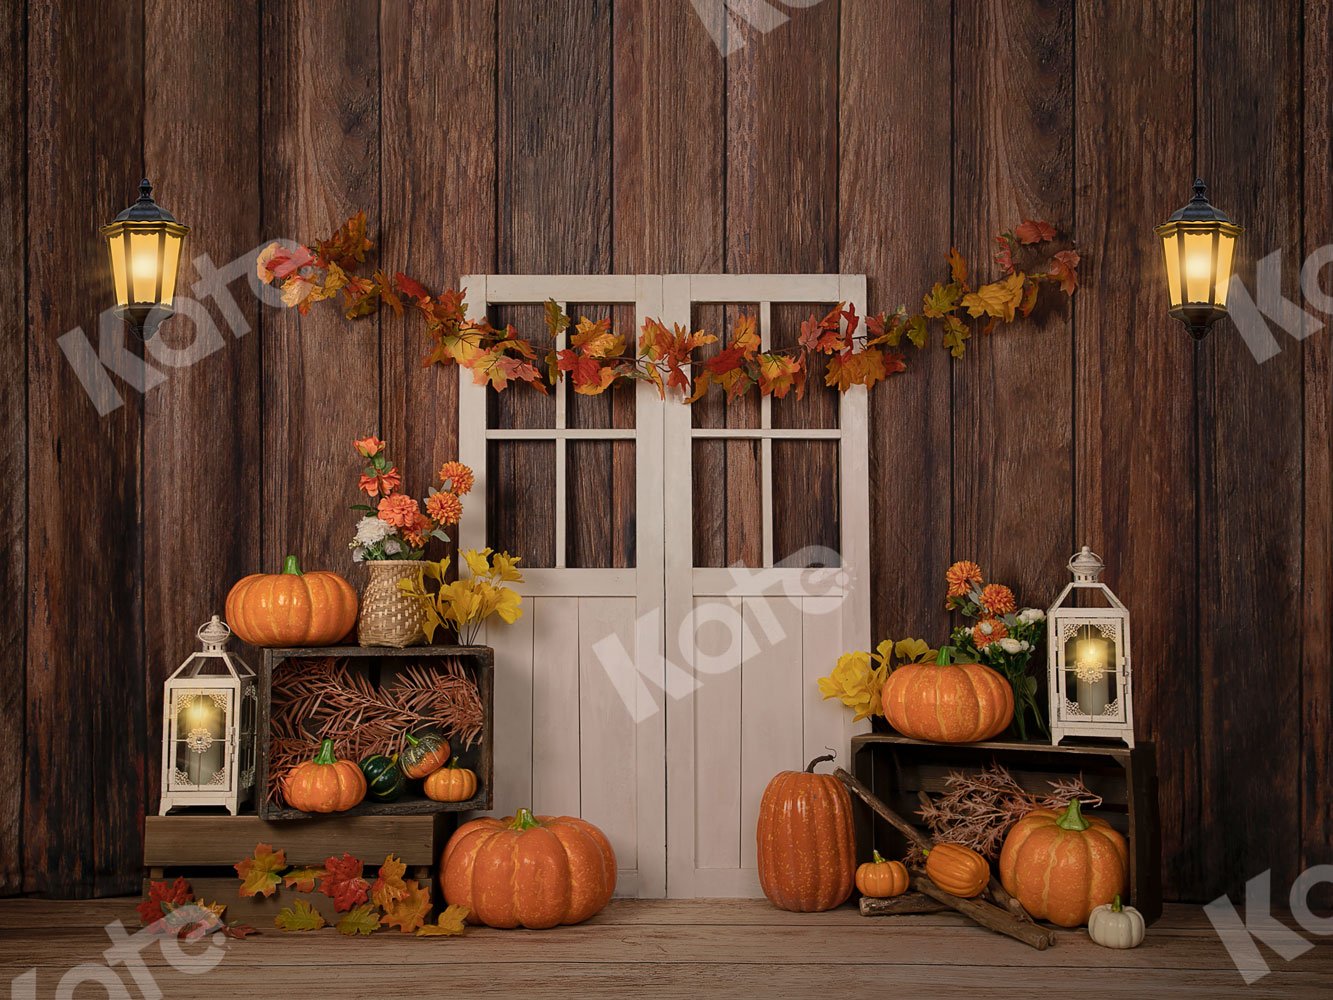 Kate Autumn/Thanksgiving Pumpkins with Lights Backdrop Designed by Jia Chan Photography